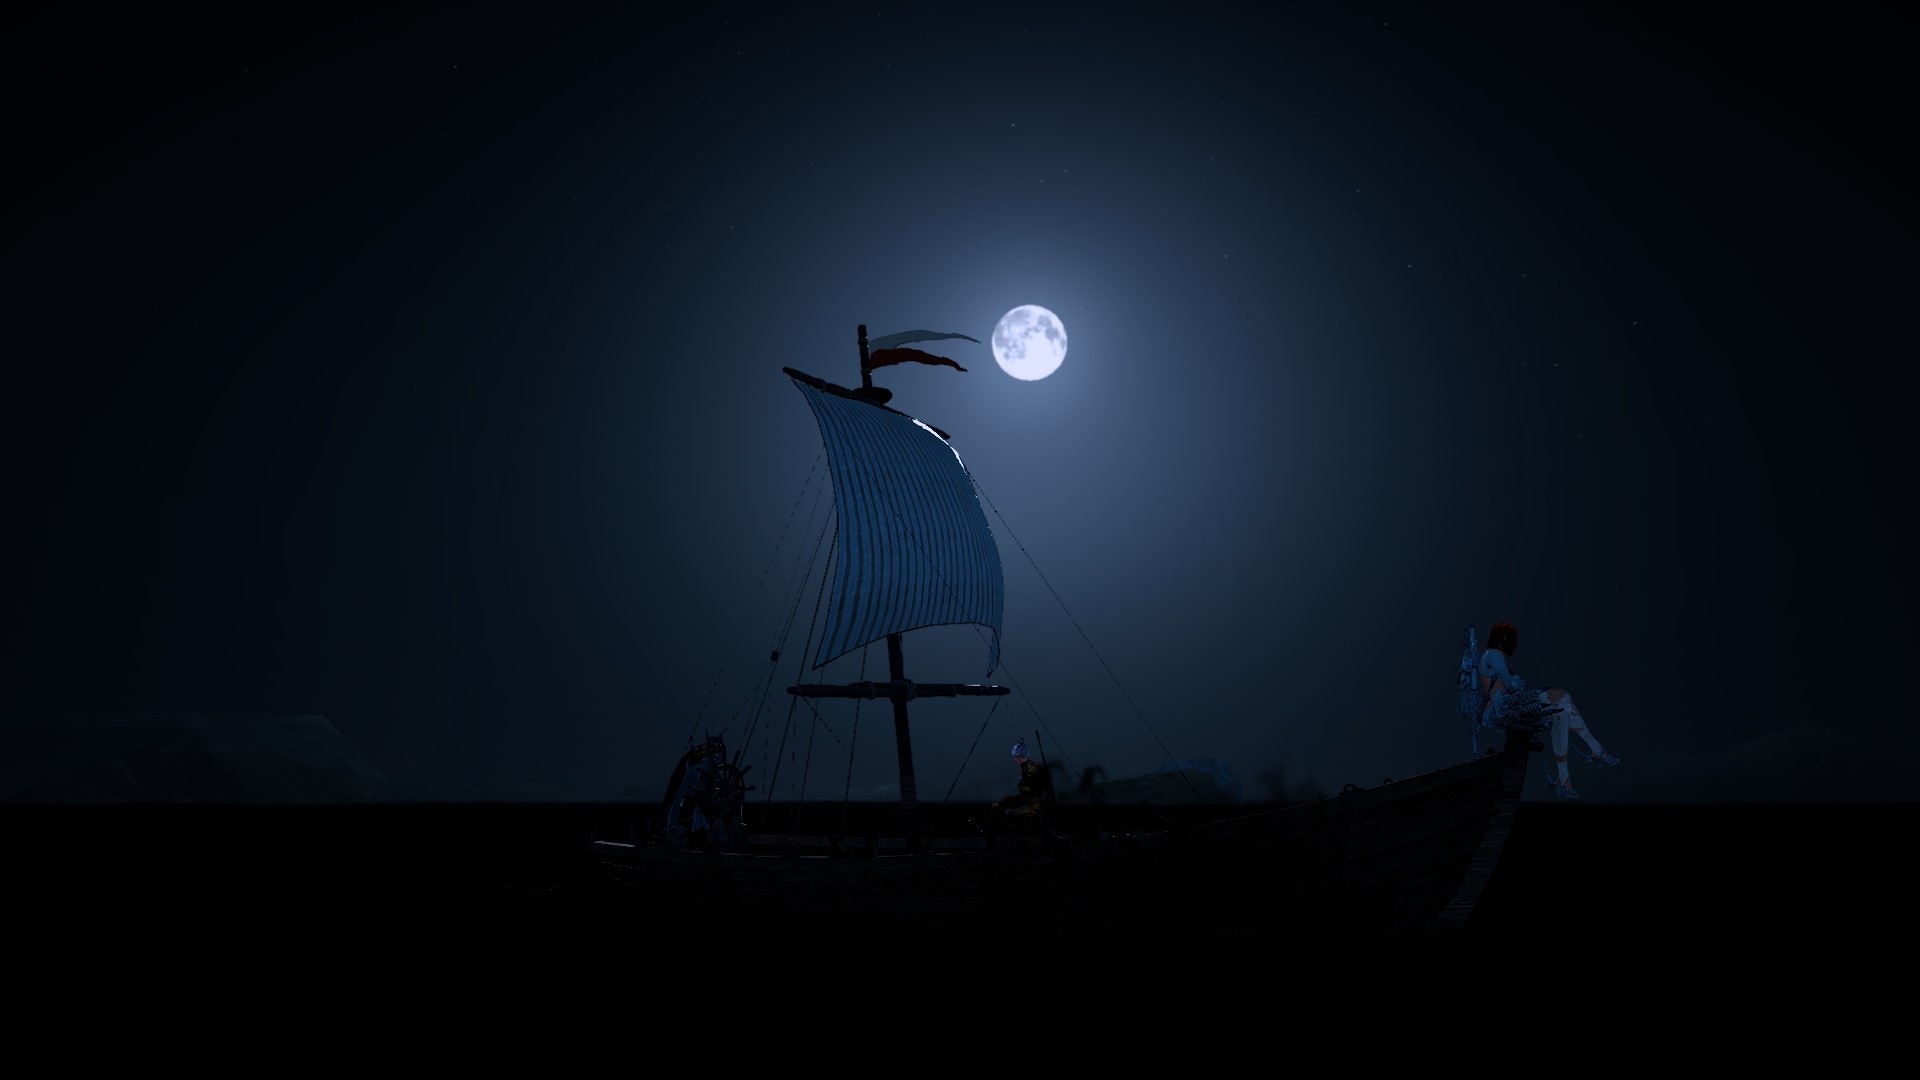 Sailing by moonlight